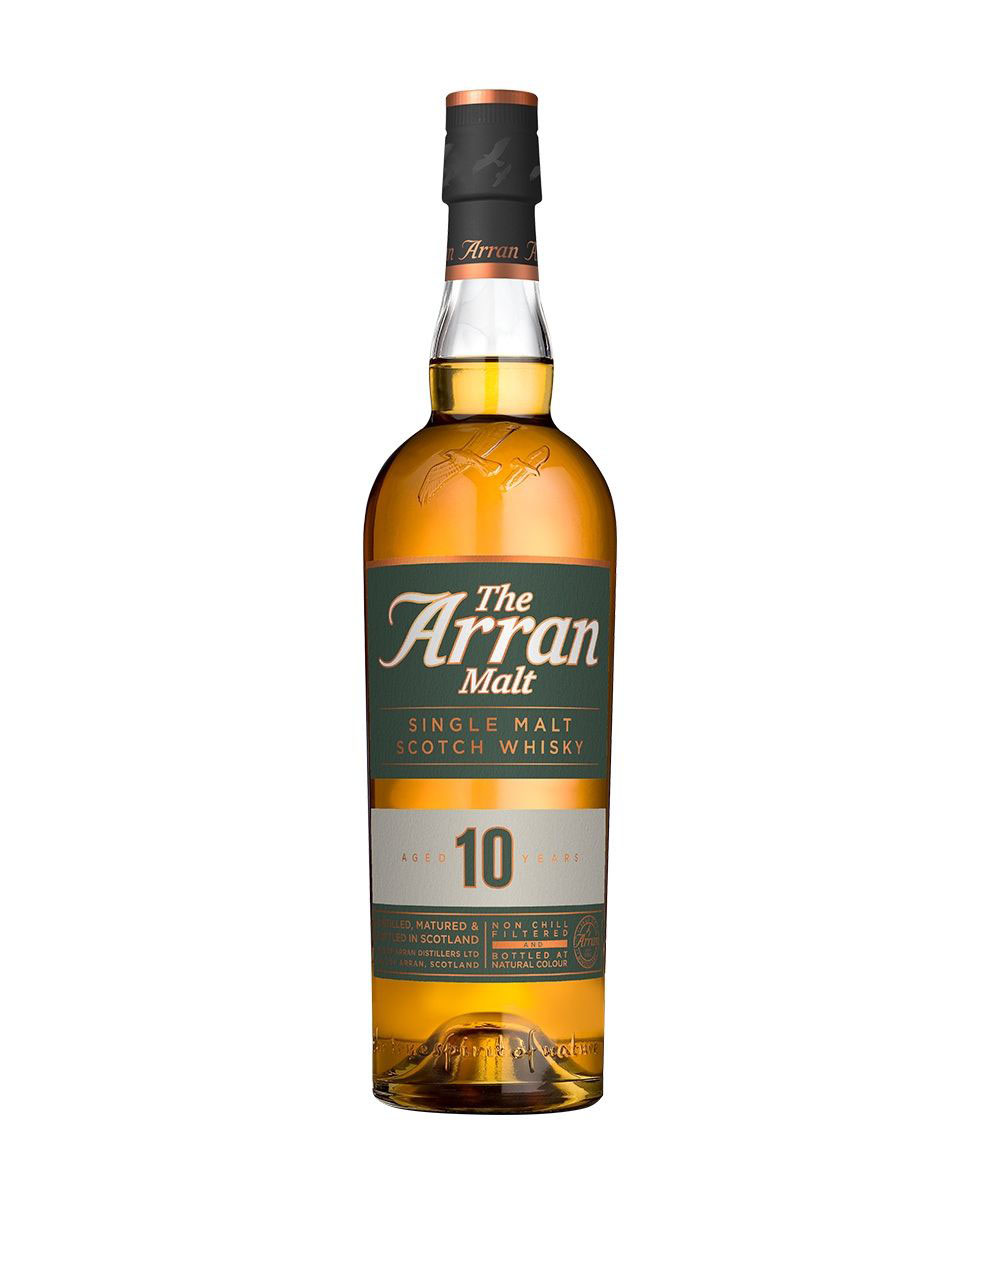 The Arran 10 Year Old Scotch Whisky